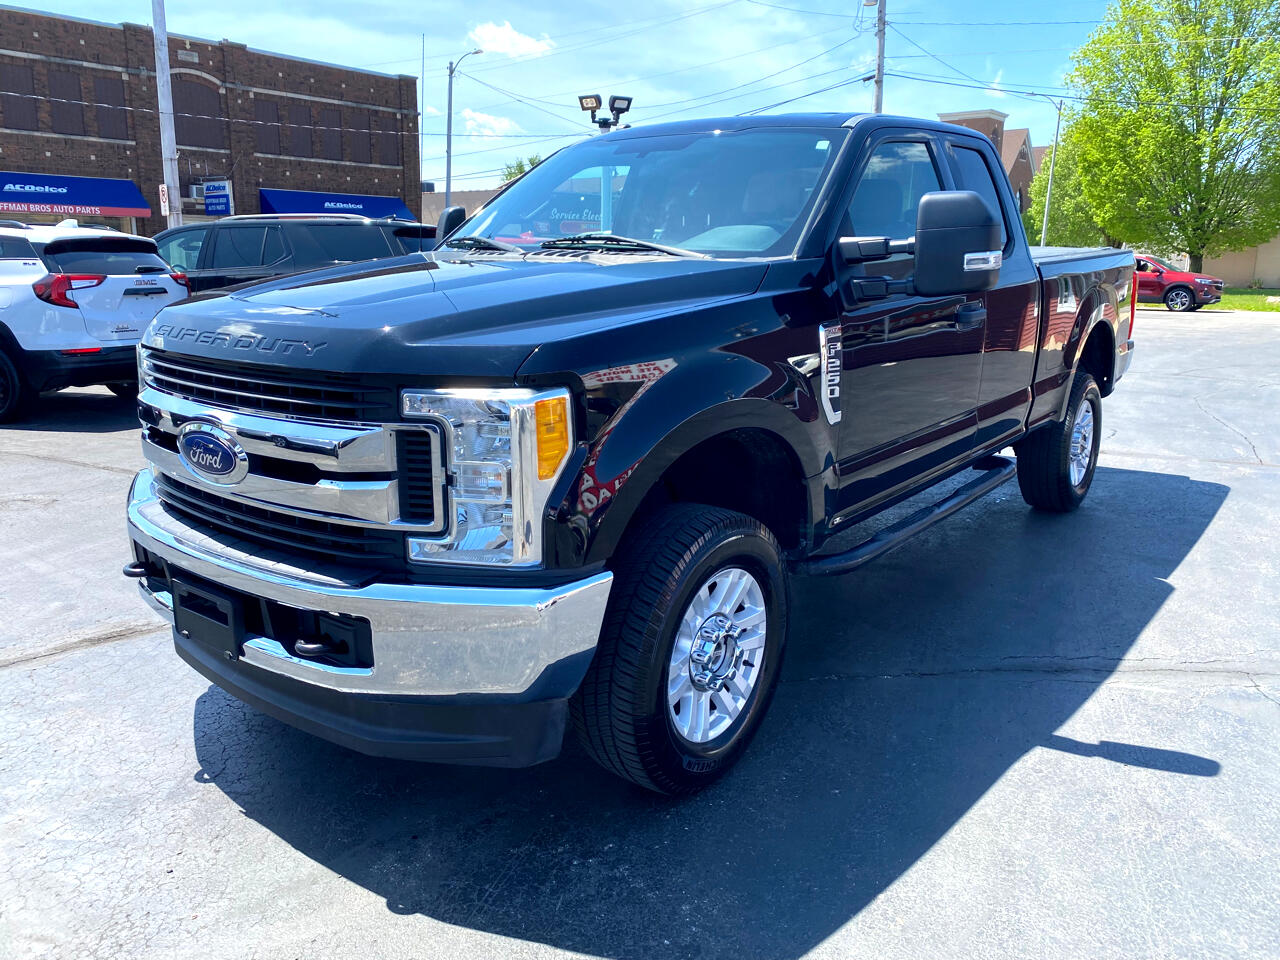 2017 Ford F-250 SD XLT SuperCab Long Bed 4WD